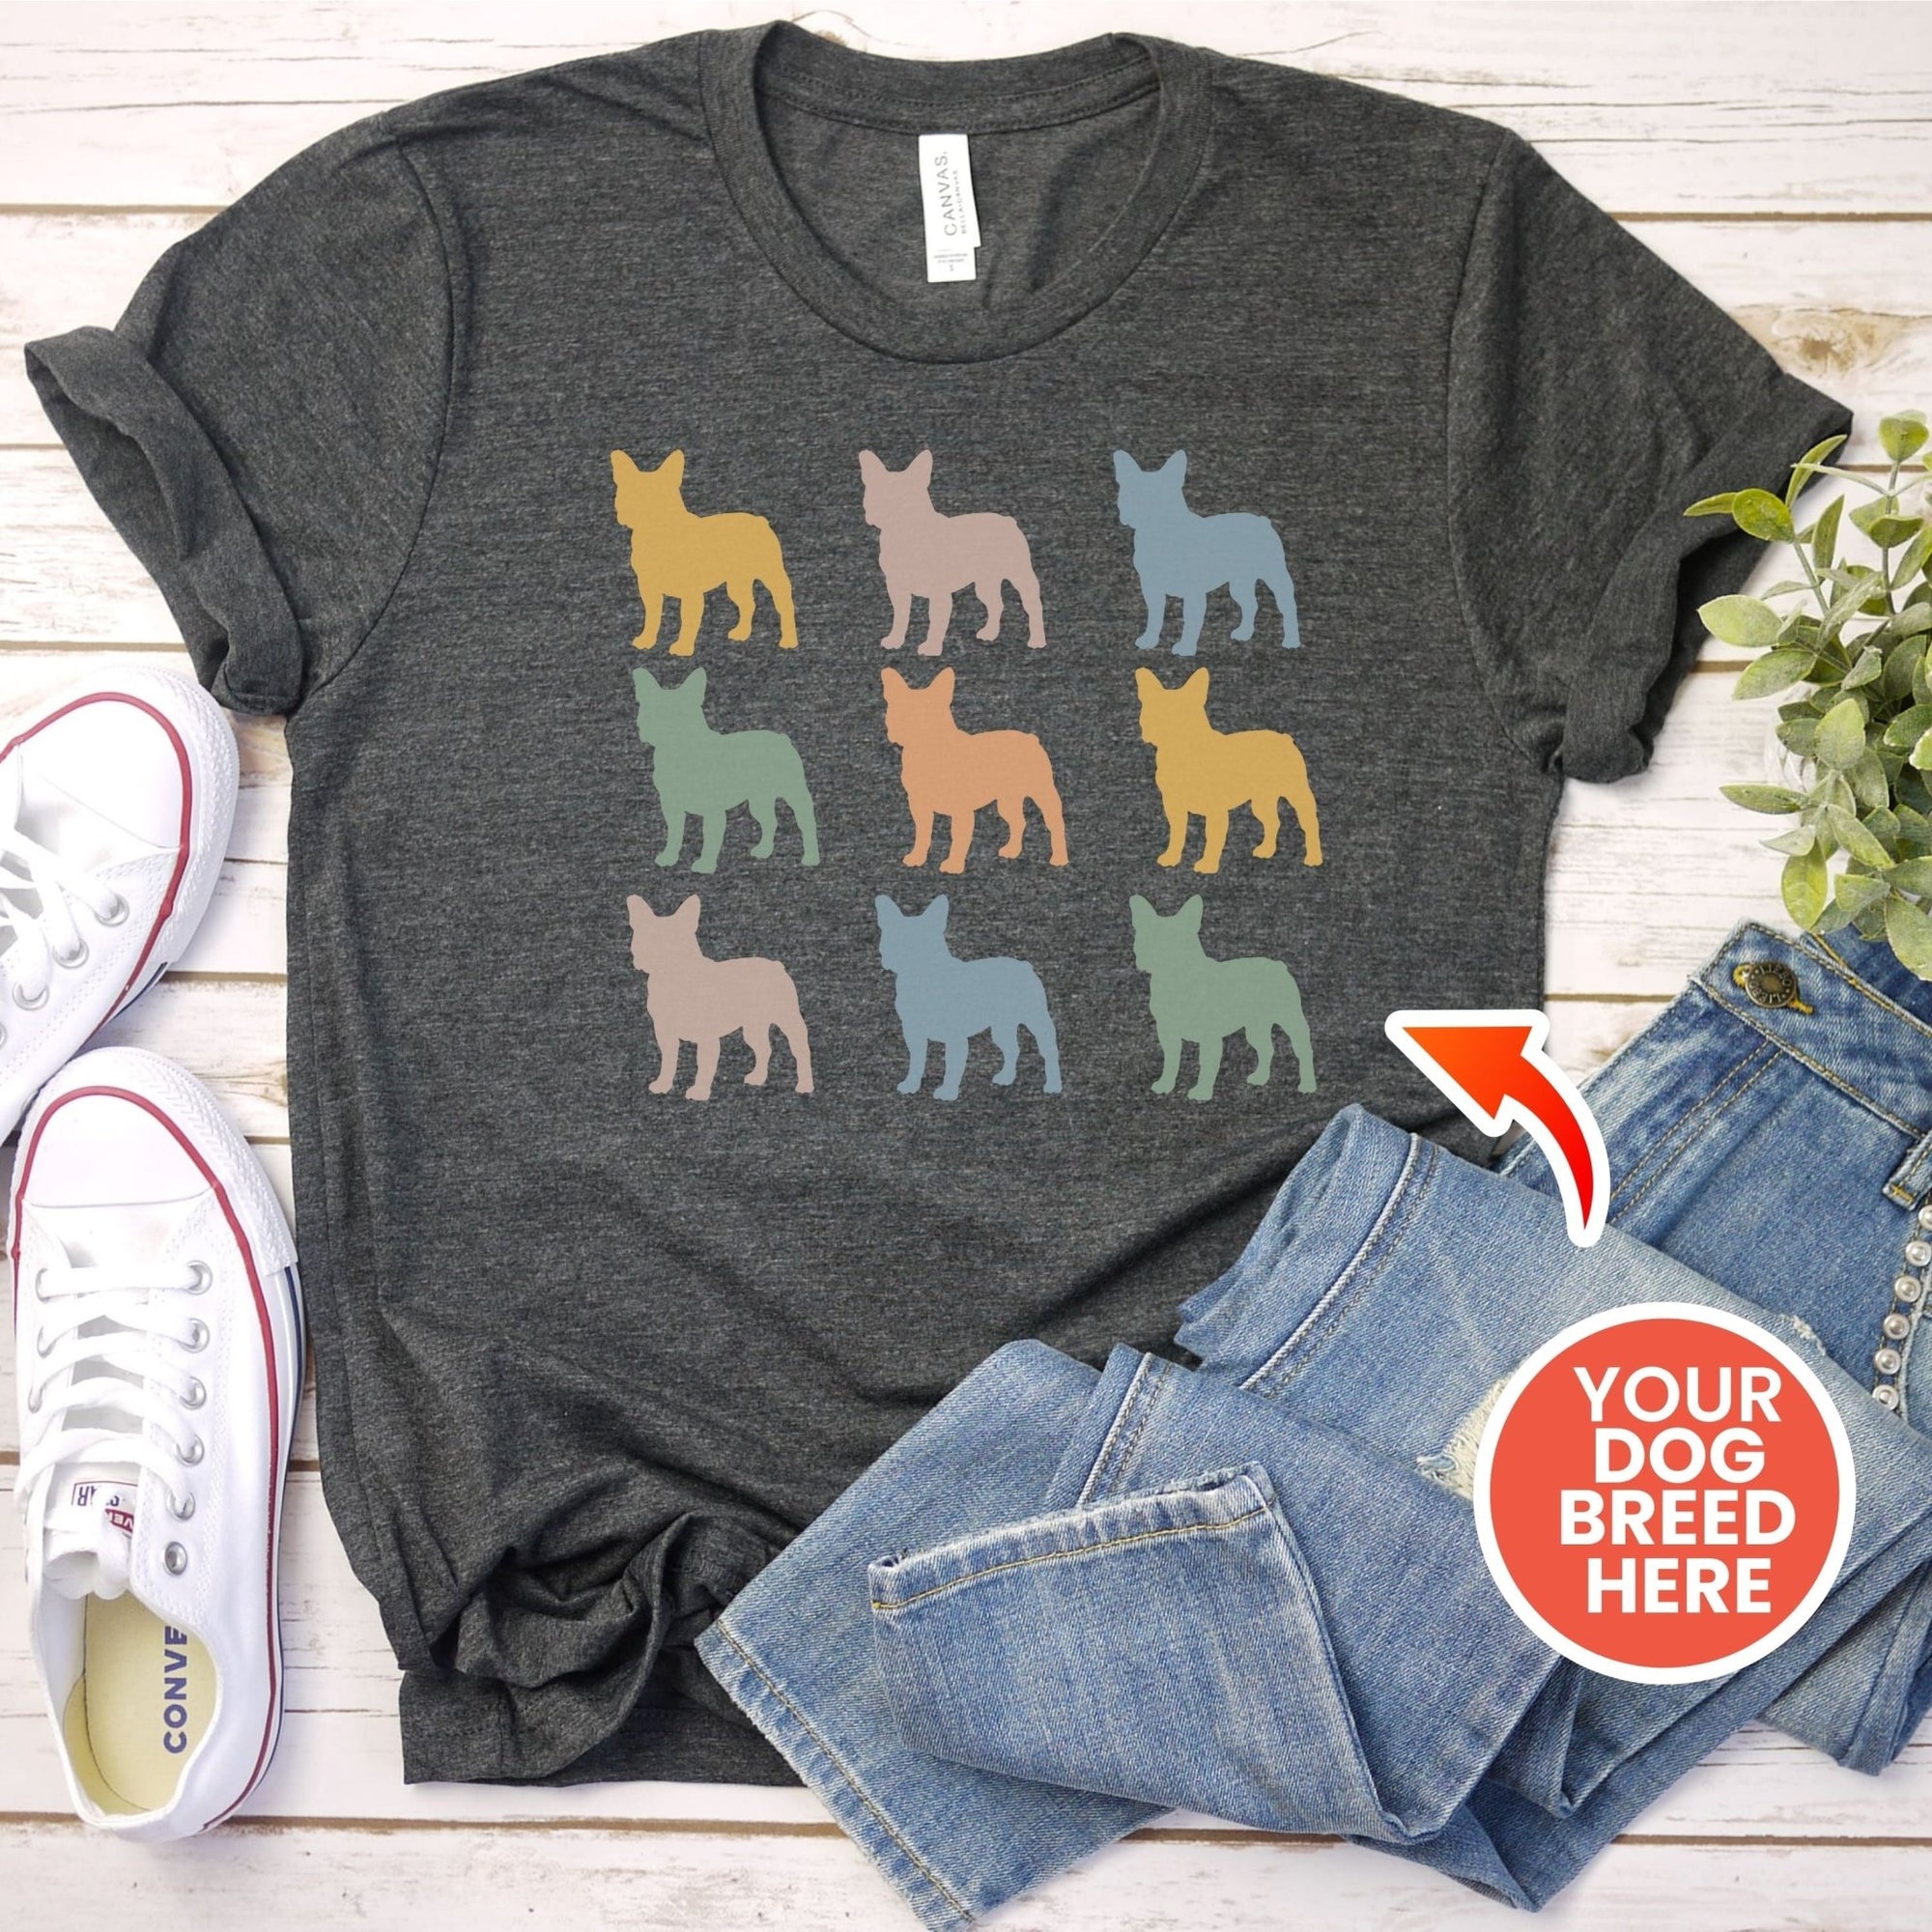 Pet Themed T-Shirts | Customized for your Pet or Ready-to-wear options